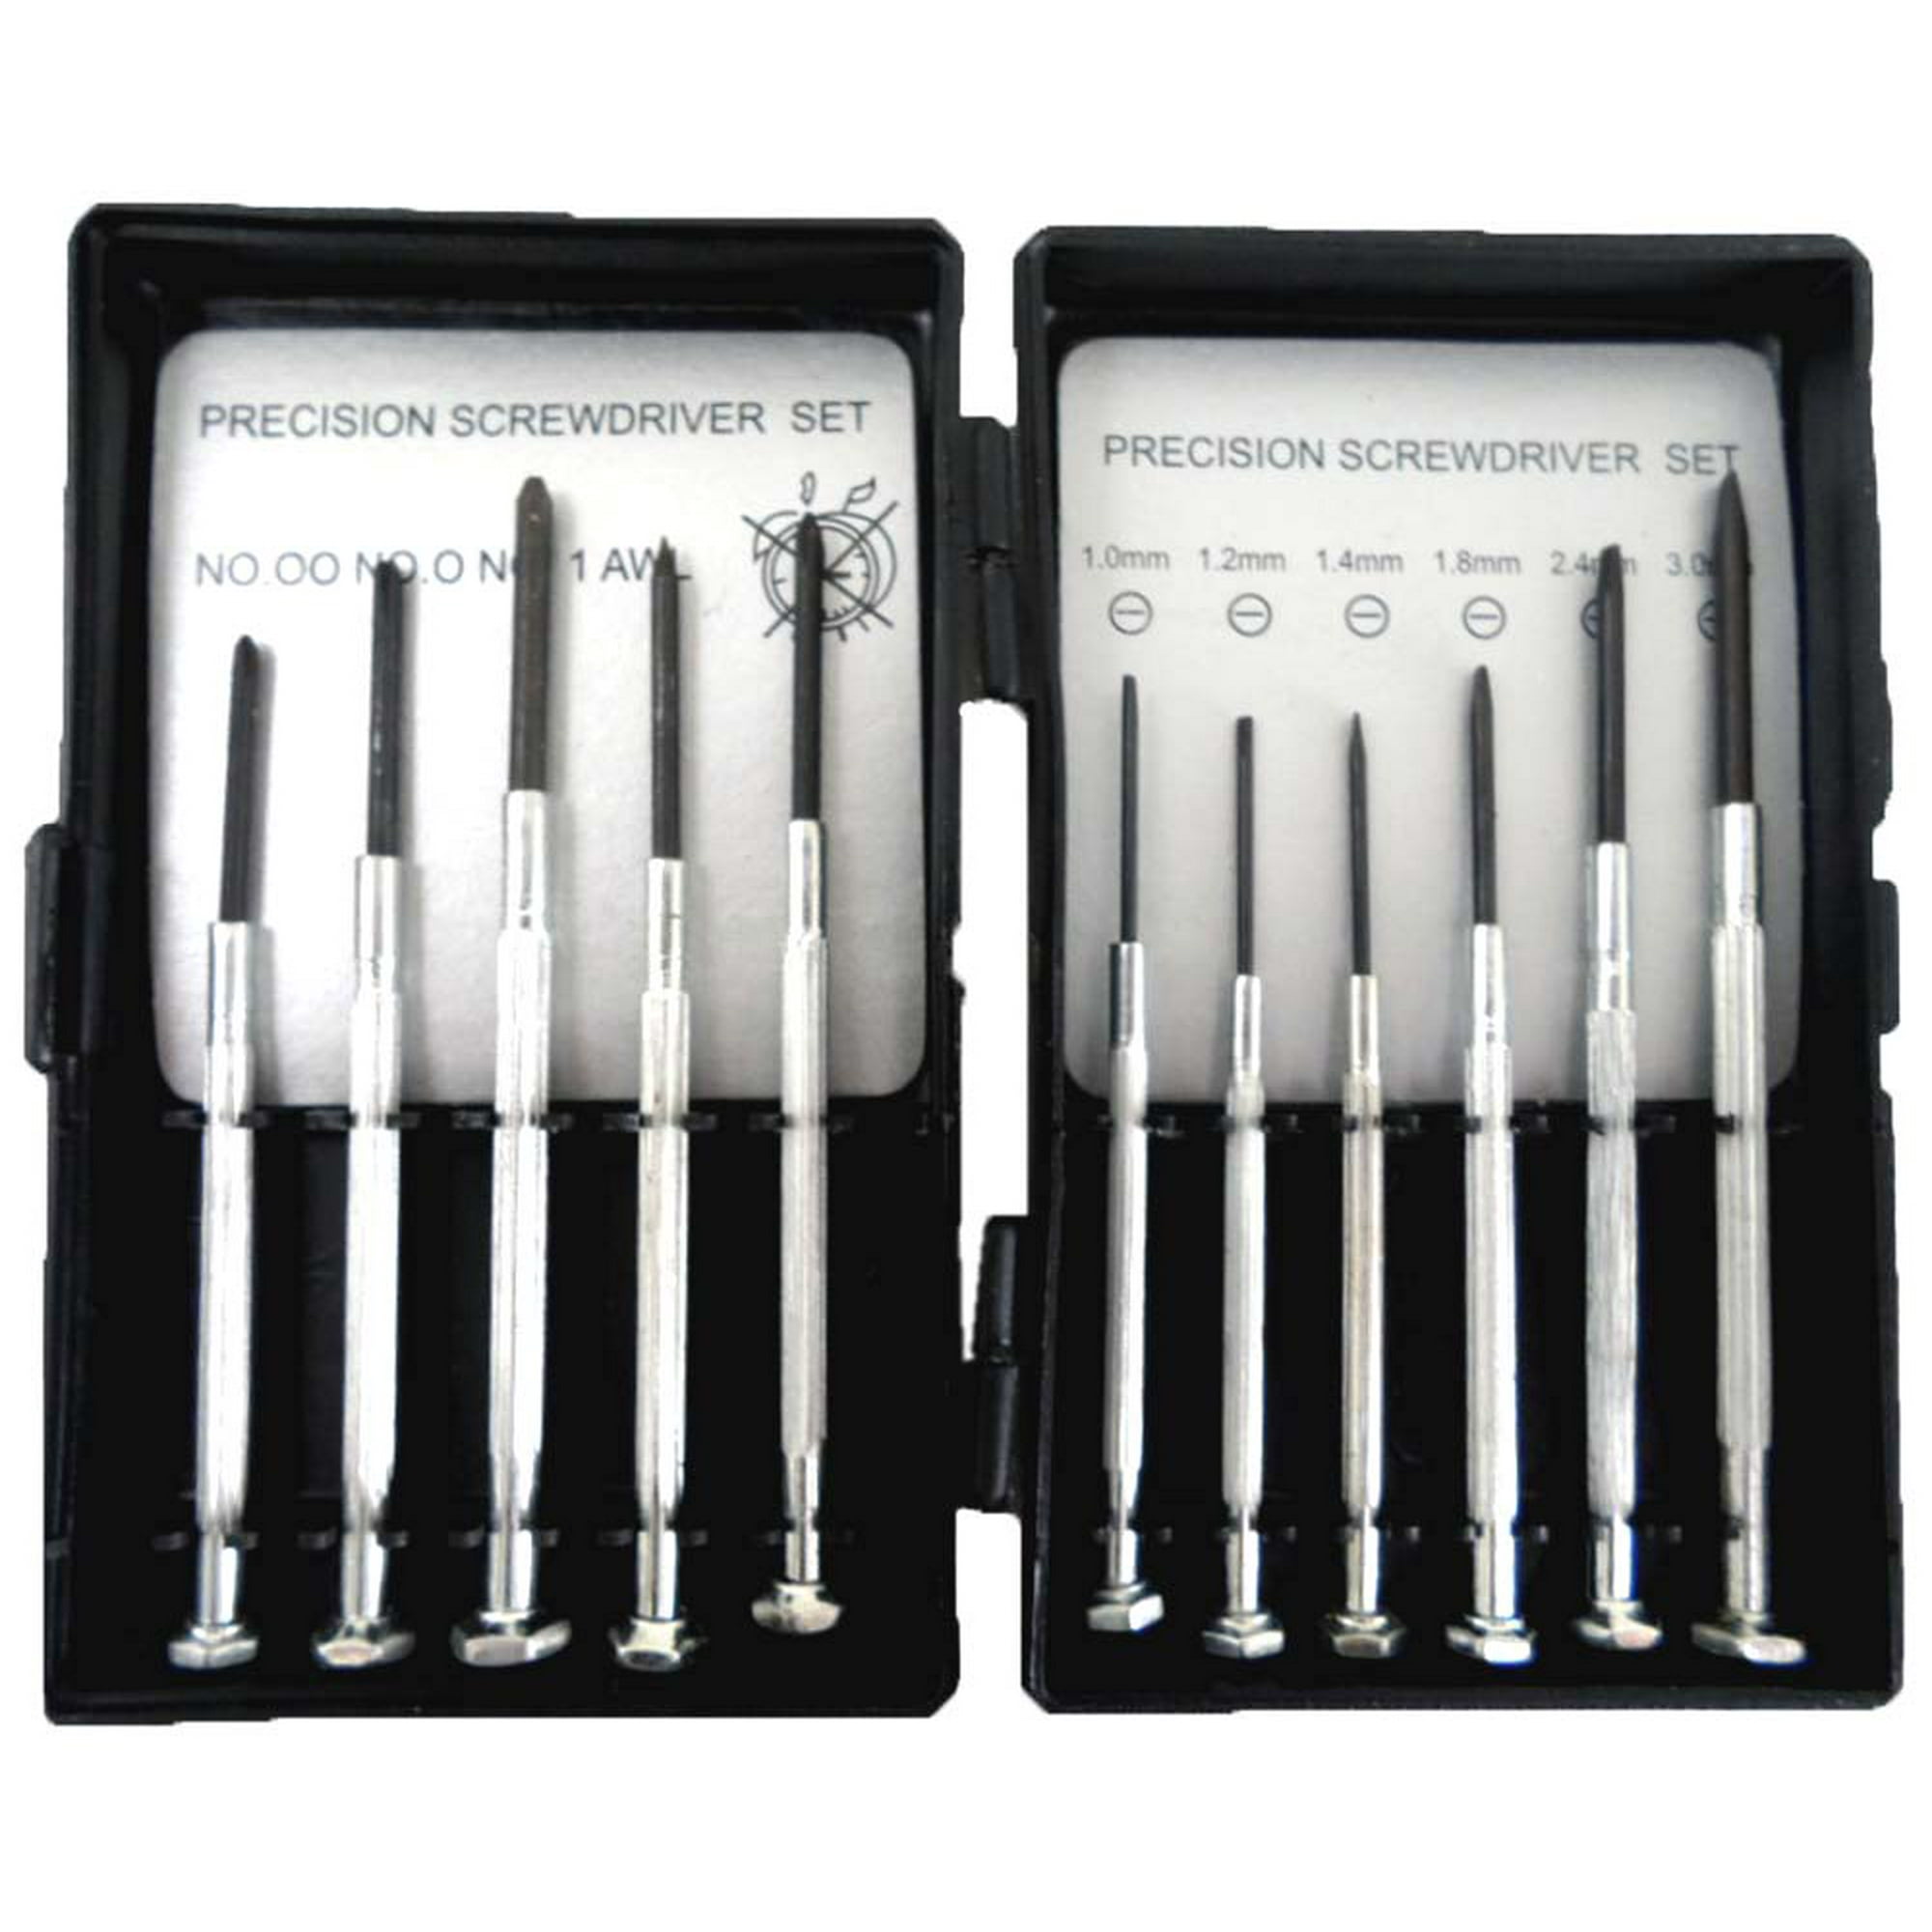 11 Piece Precision Carbon Steel Screwdriver Set - 3 Phillips, 6 Slotted, 1 Awl, and Magnetic Pick-up Tool with a Storage Case - image 1 of 2